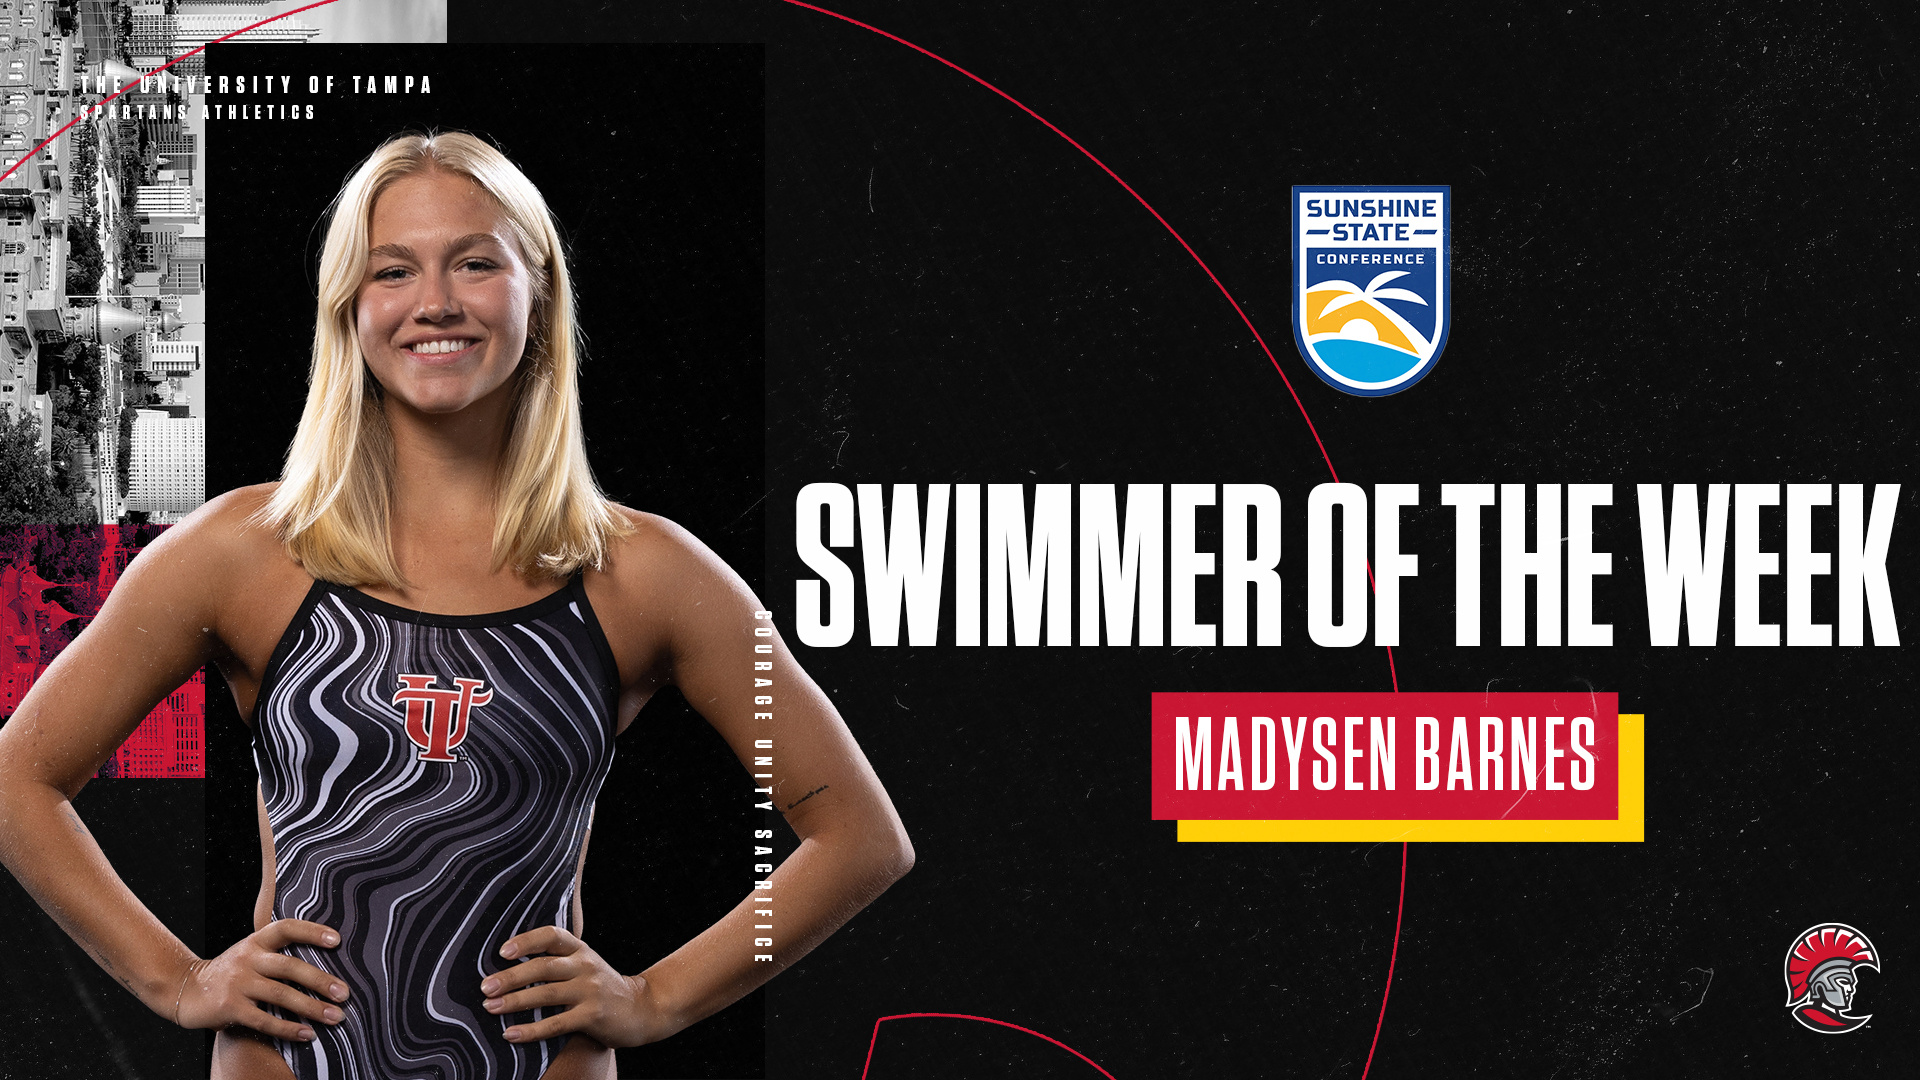 SSC Honors Madysen Barnes as Swimmer of the Week